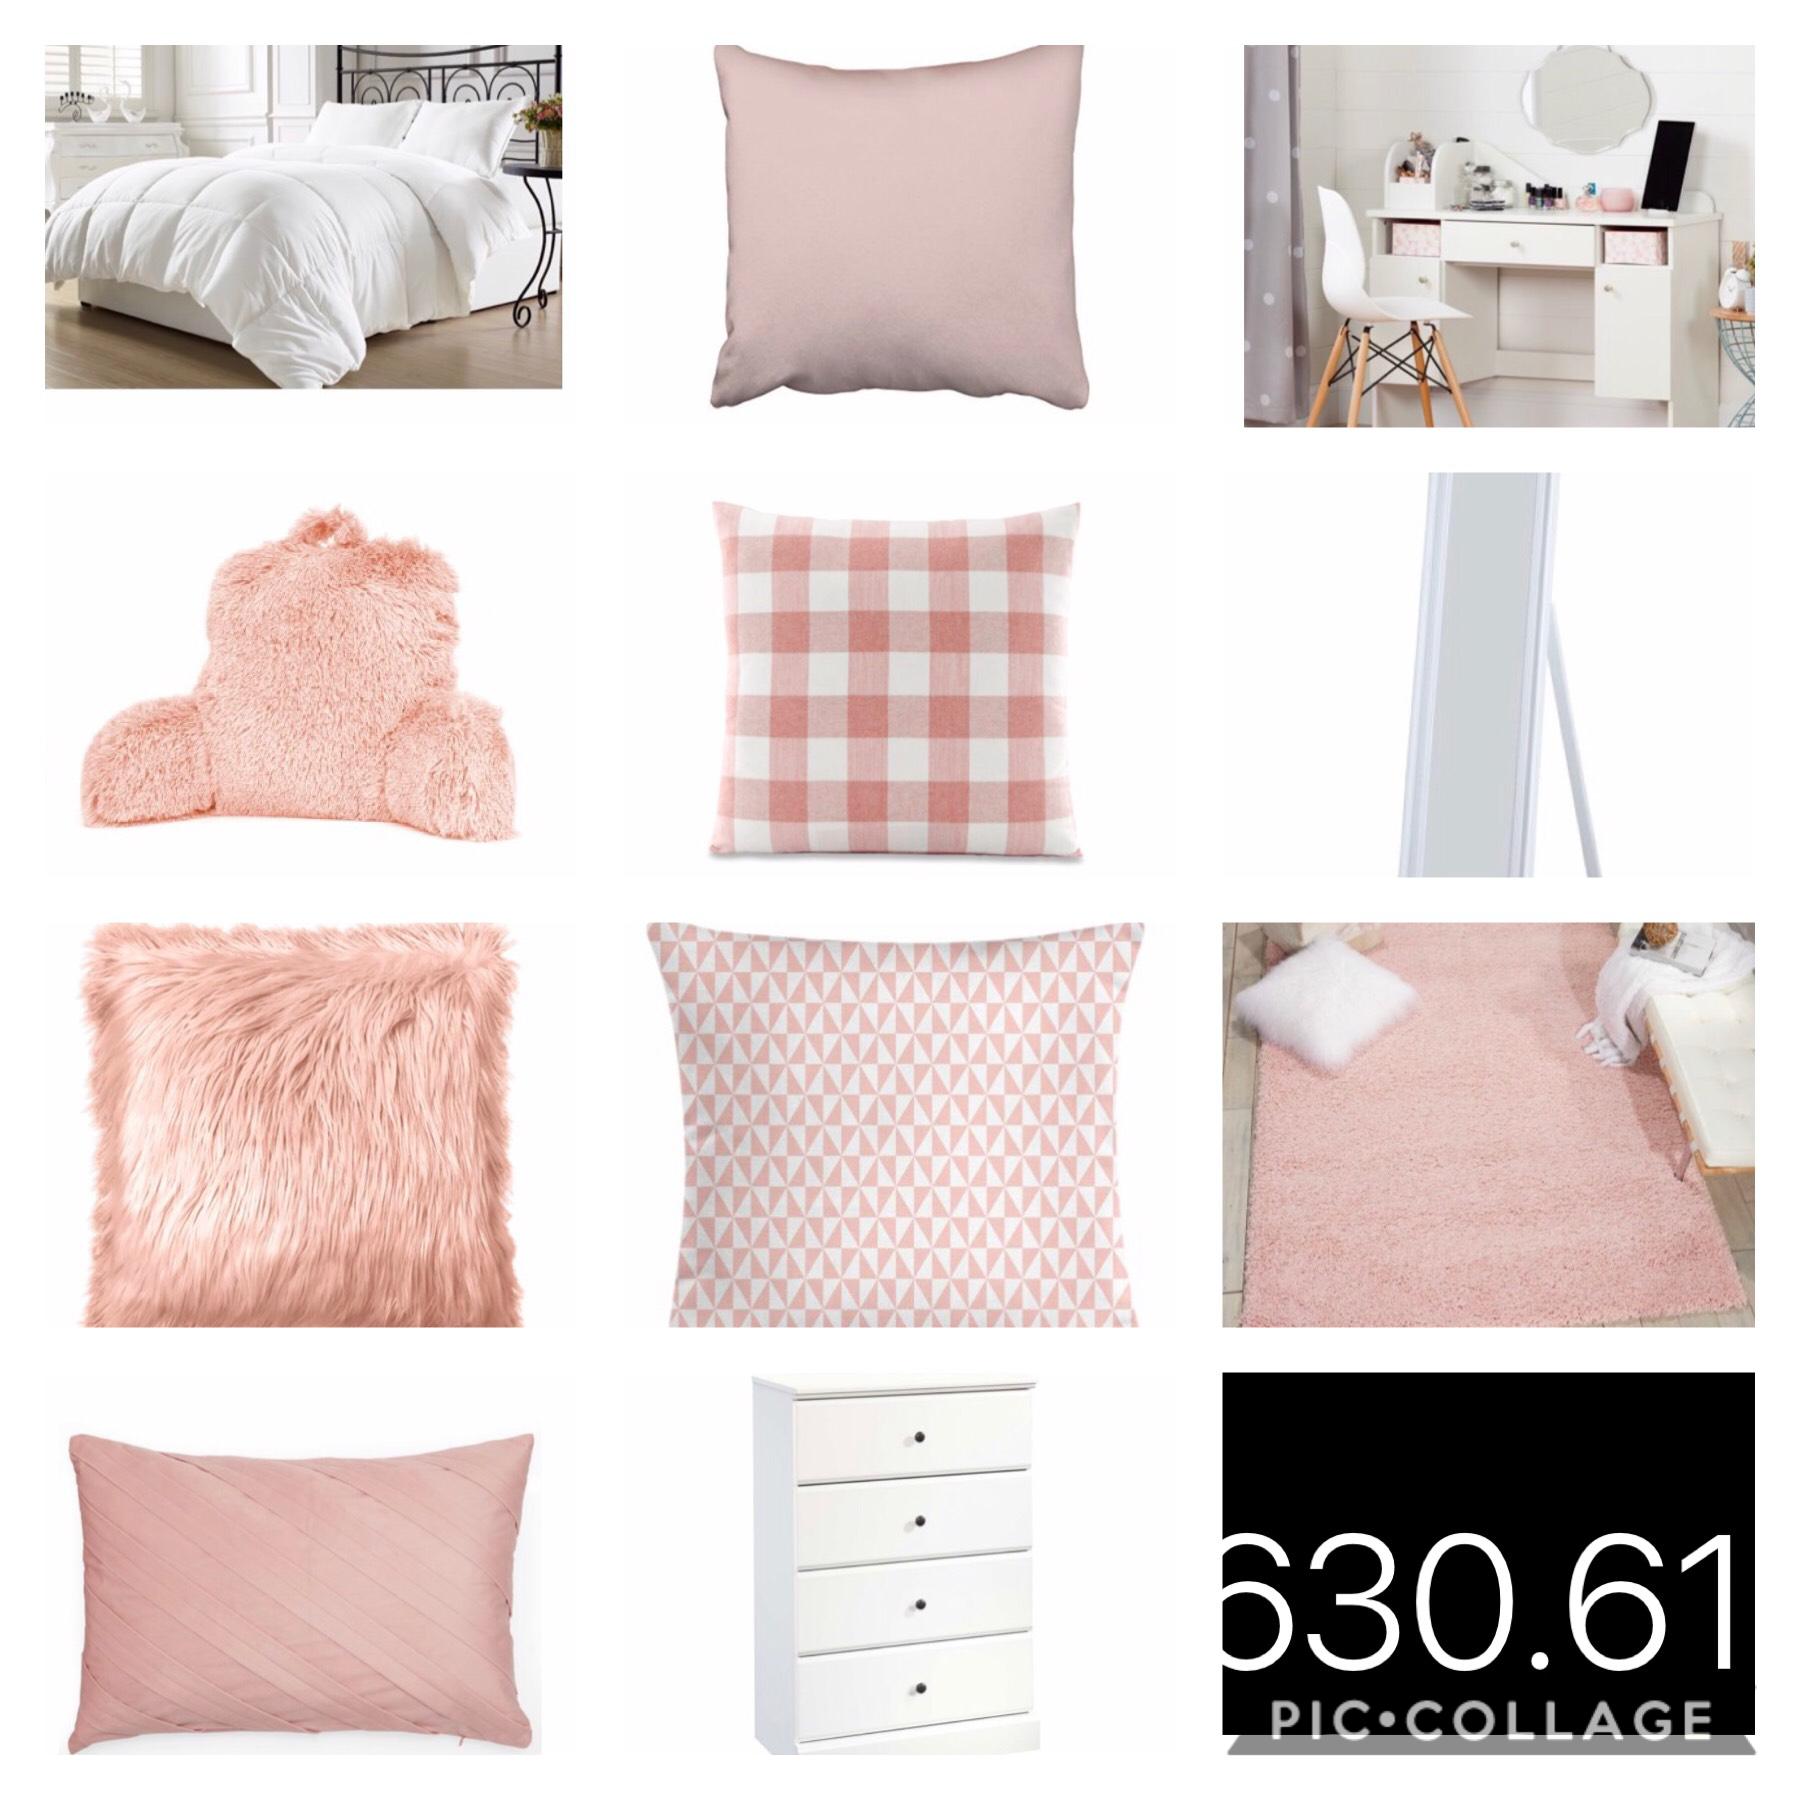 All my new bedroom stuff im gonna get, it is 640$ Sorry mom and dad!! Lol 